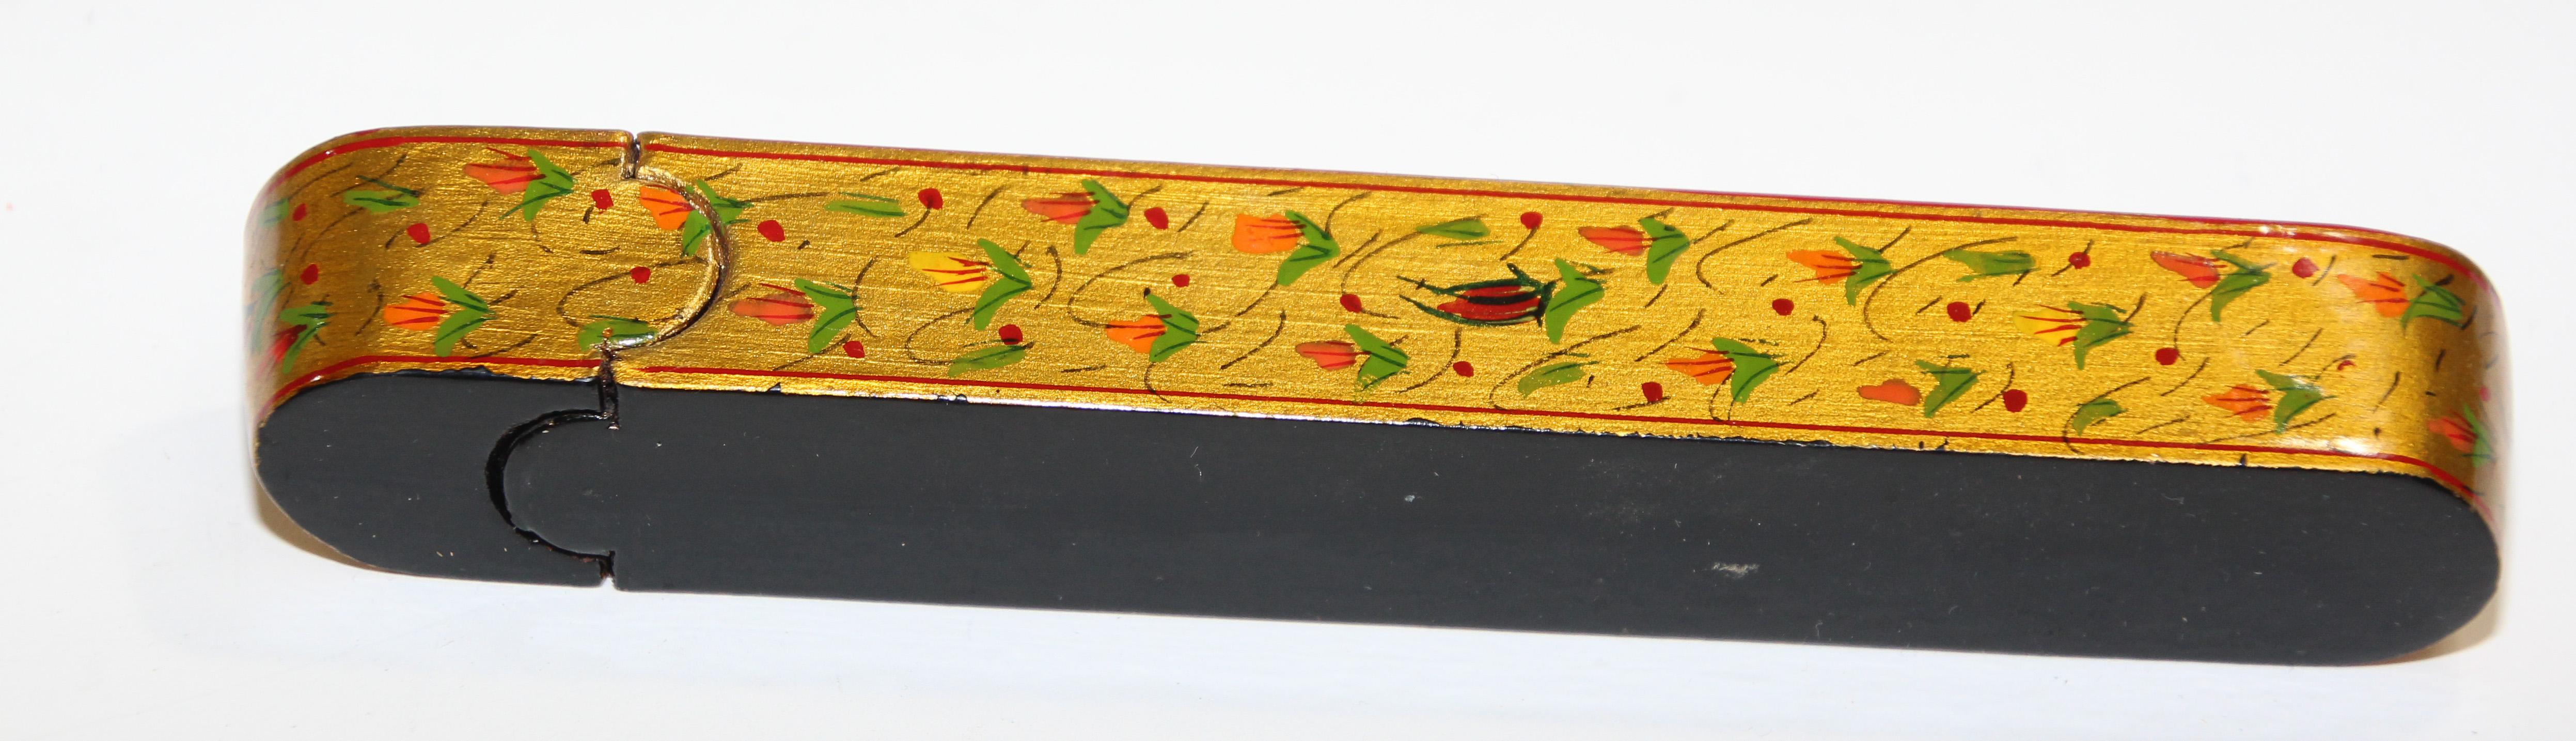 Persian Lacquer Pen Box Hand Painted with Floral and Gilt Design For Sale 2